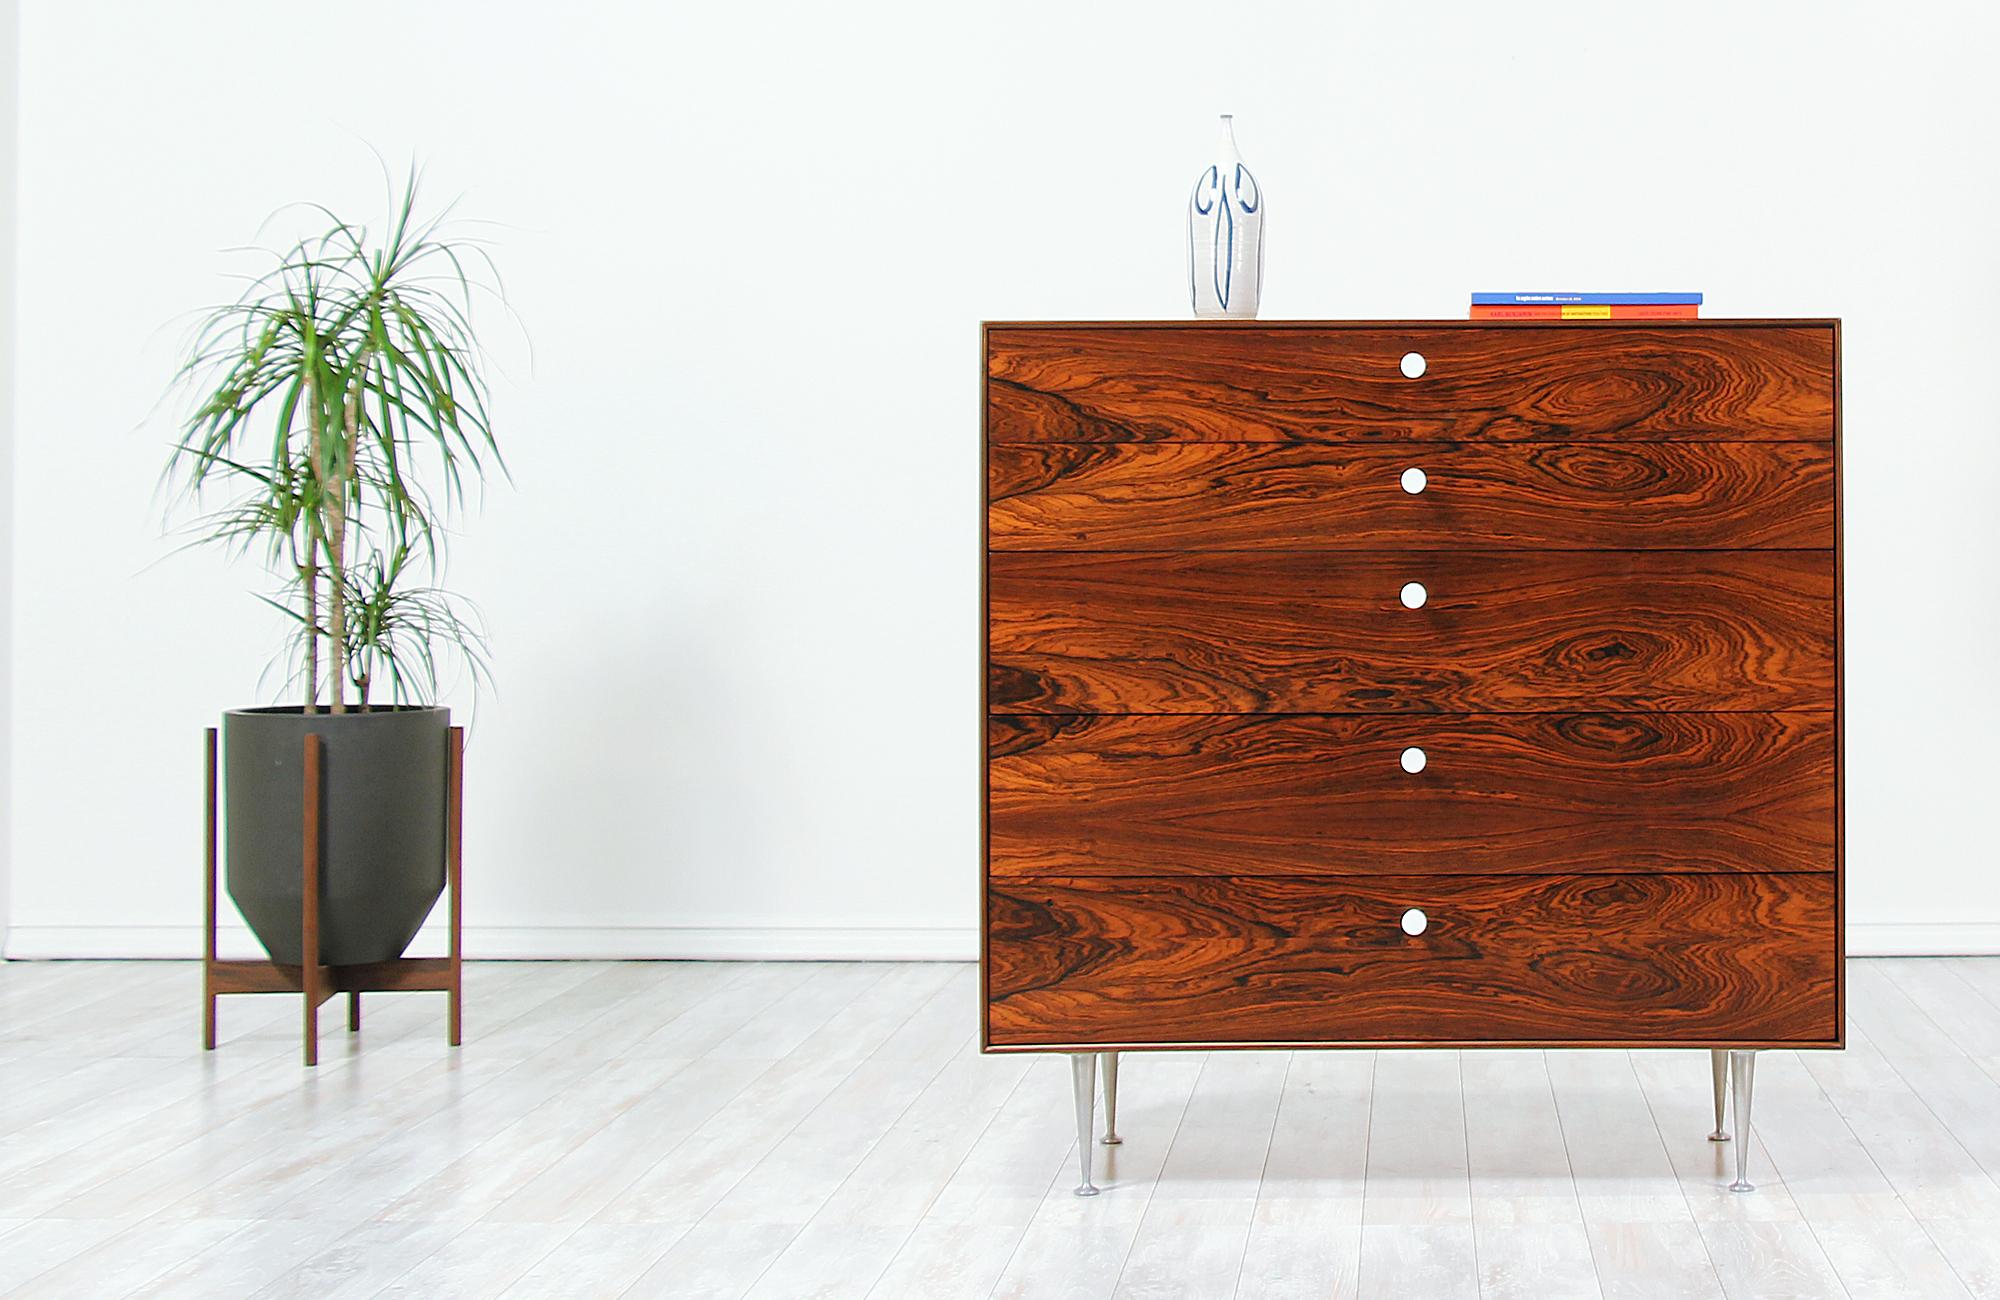 Stunning chest of drawers designed by George Nelson for Herman Miller in the United States circa 1950s. Just like the rest of his 'Thin Edge' collection for Herman Miller, this beautiful rosewood chest features a solid frame with five drawers and